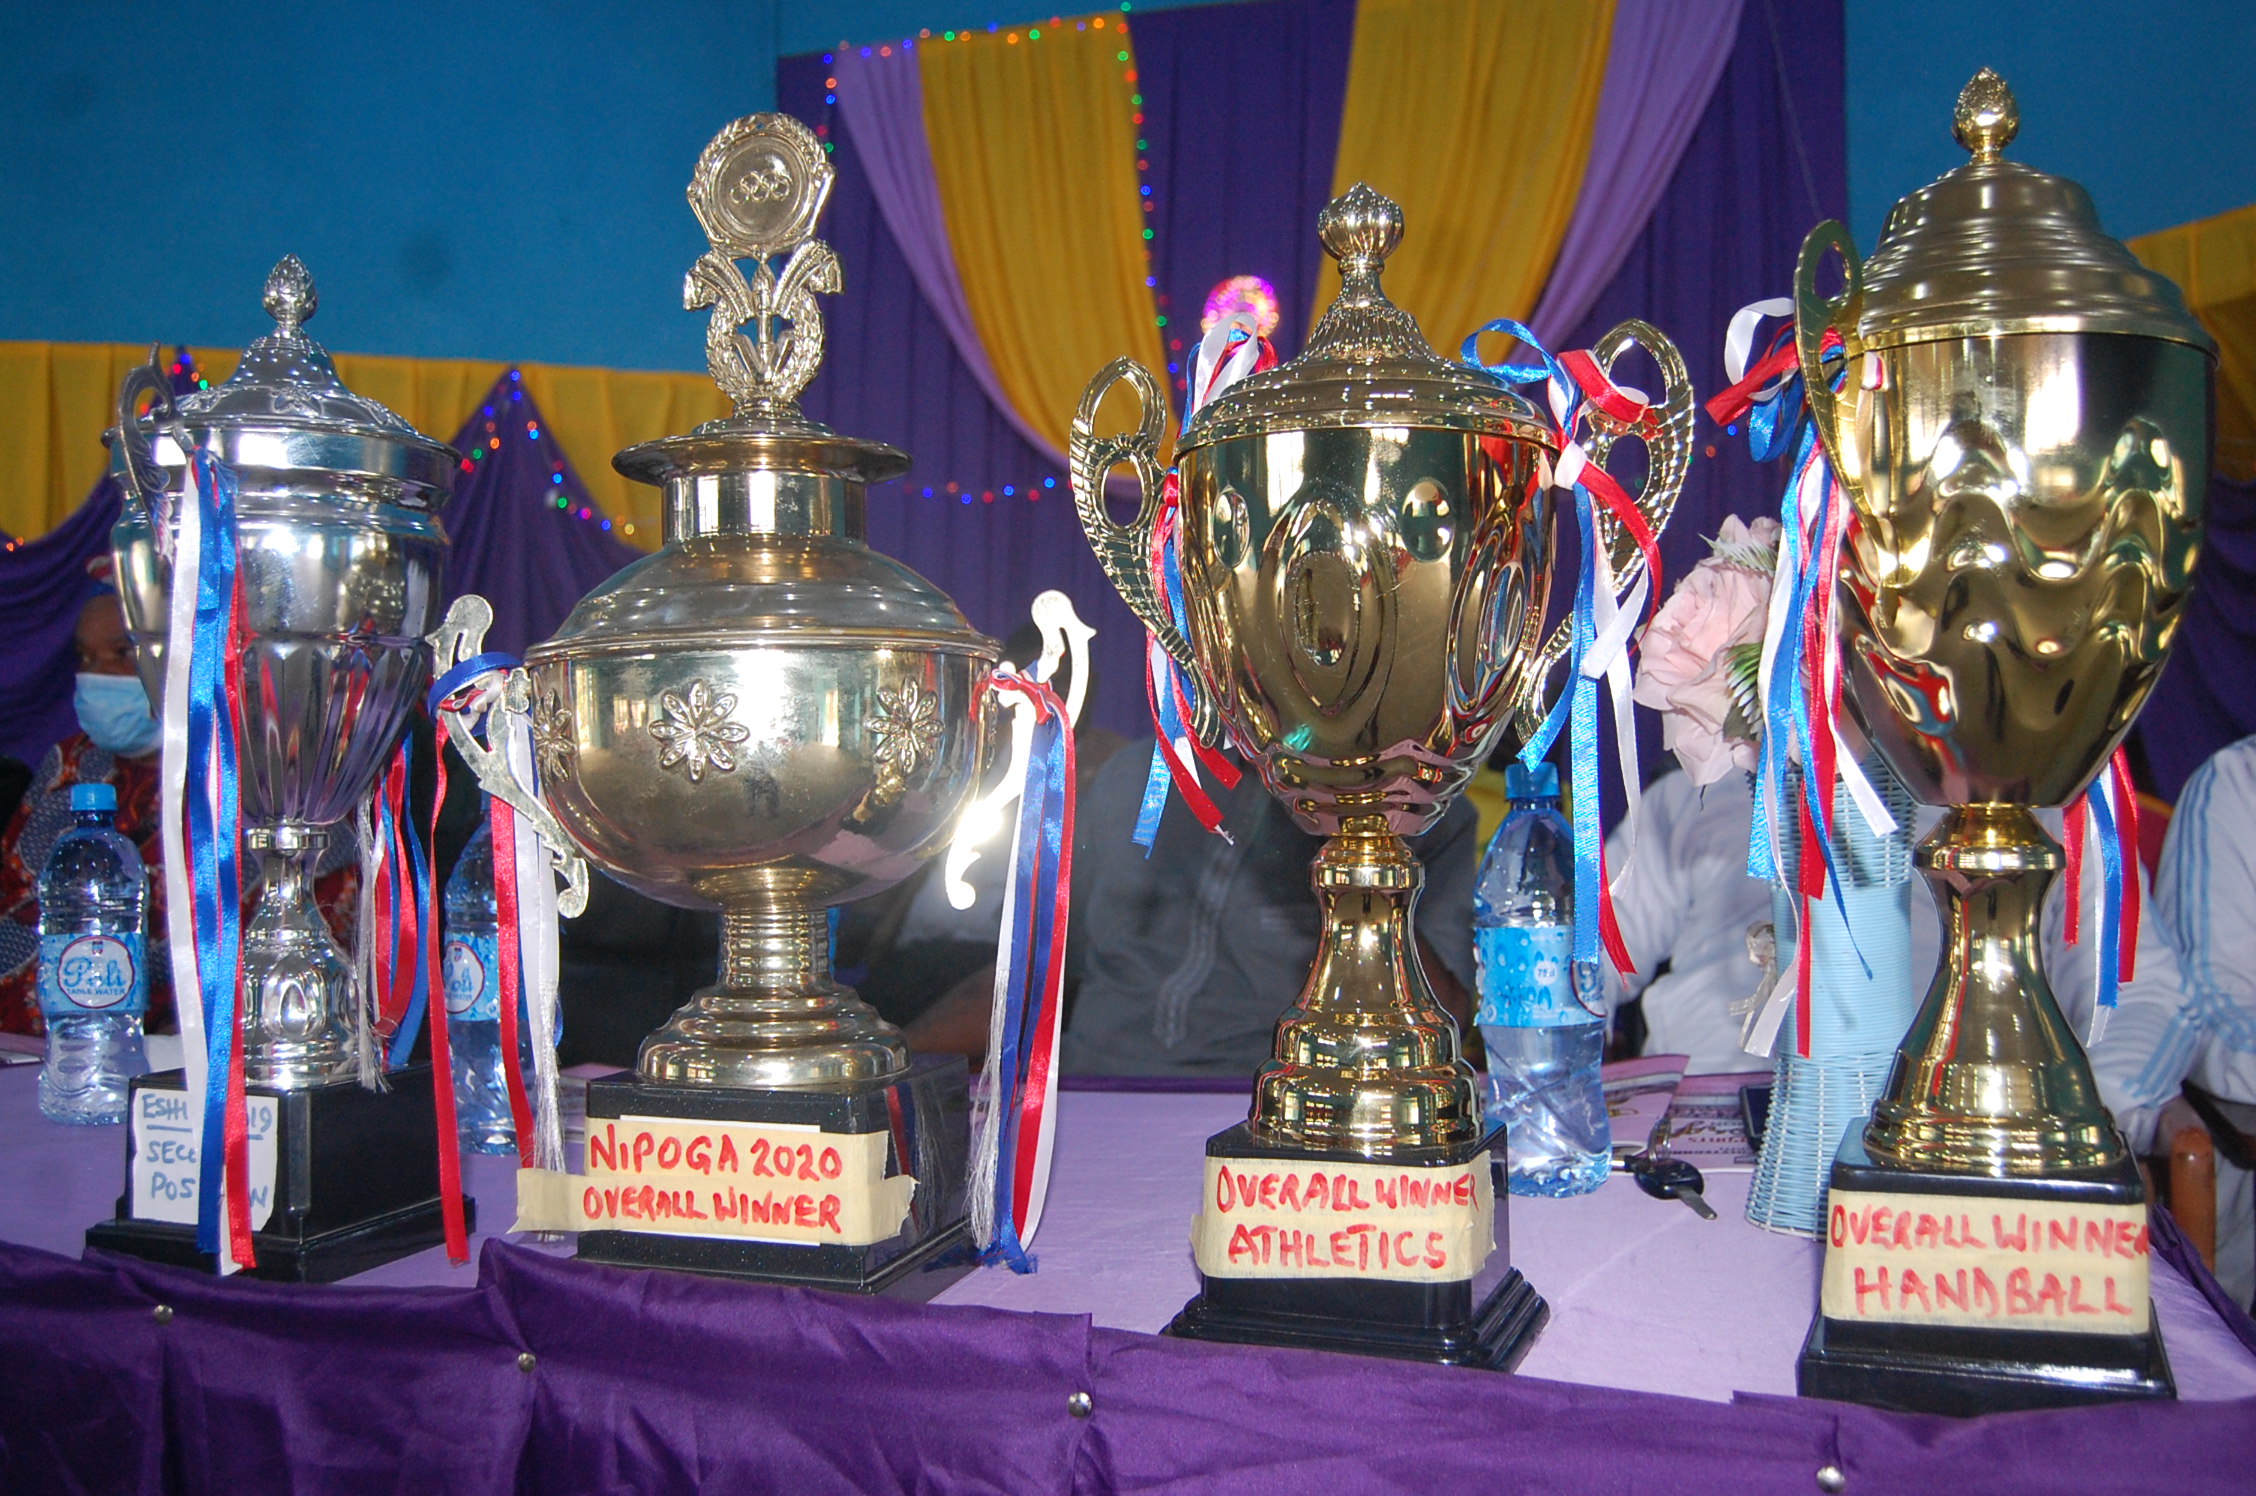 Some of the trophies won at the events on display during the ceremony